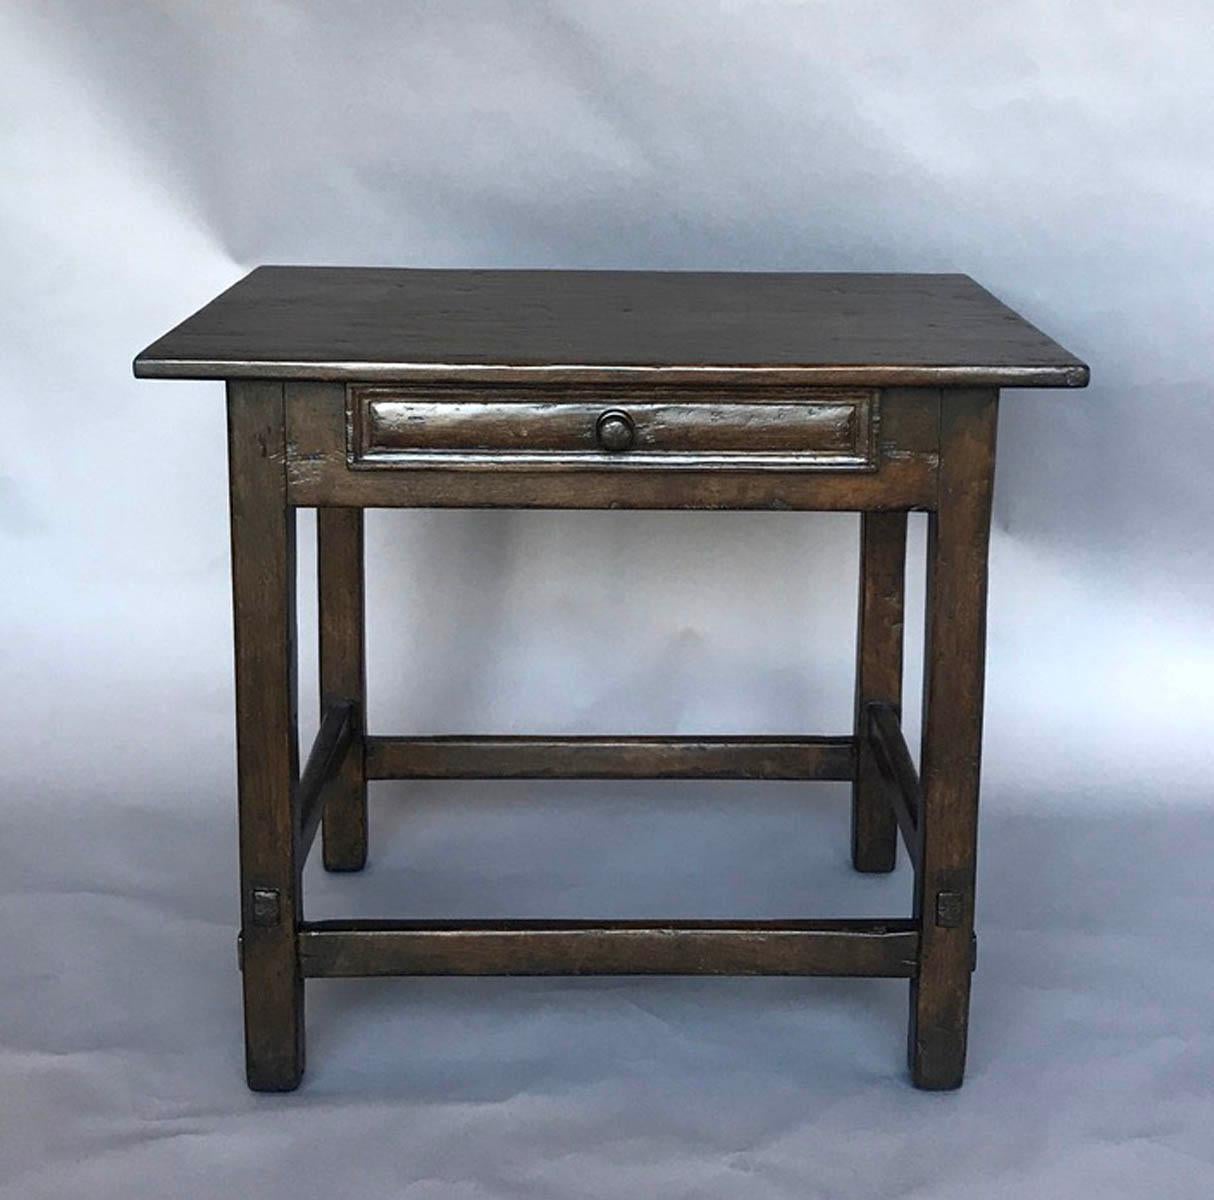 Price listed is ONLY for floor model.
Custom side table in walnut with drawer. Can be made in custom sizes and finishes. Shown here with a medium to heavy distress in a dark walnut finish in a range of colors. Made in Los Angeles by Dos Gallos